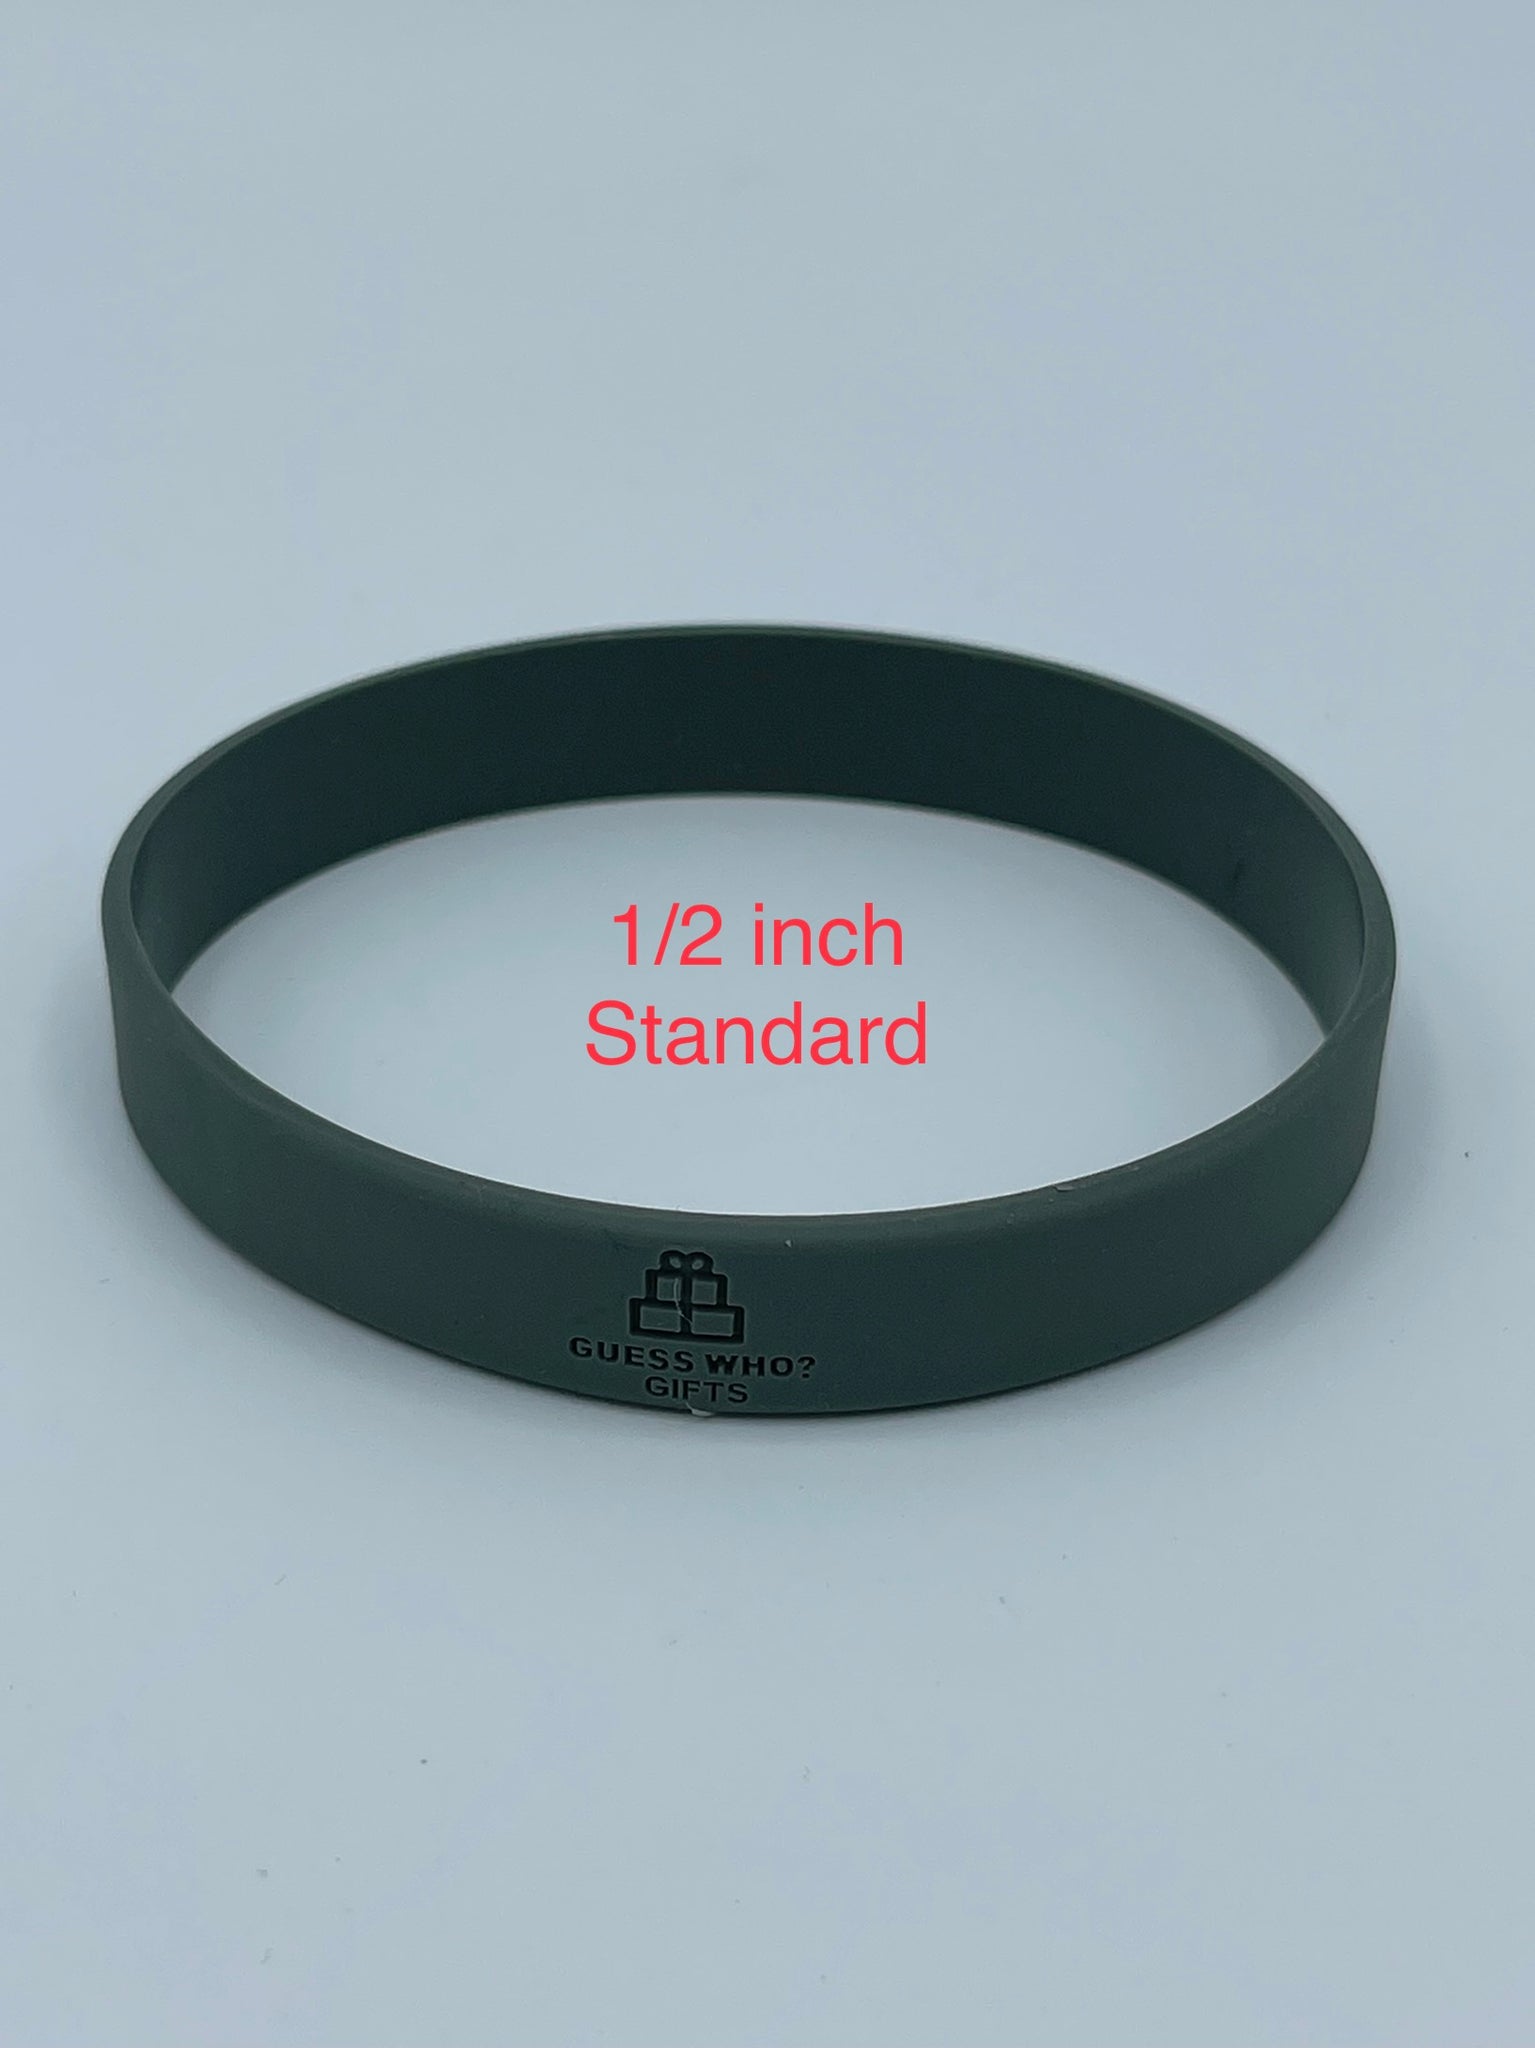 Silicone Bands For Sublimation Tumbler Kit With 2pieces Silicone Sleeve  2pieces Silicone Bands For